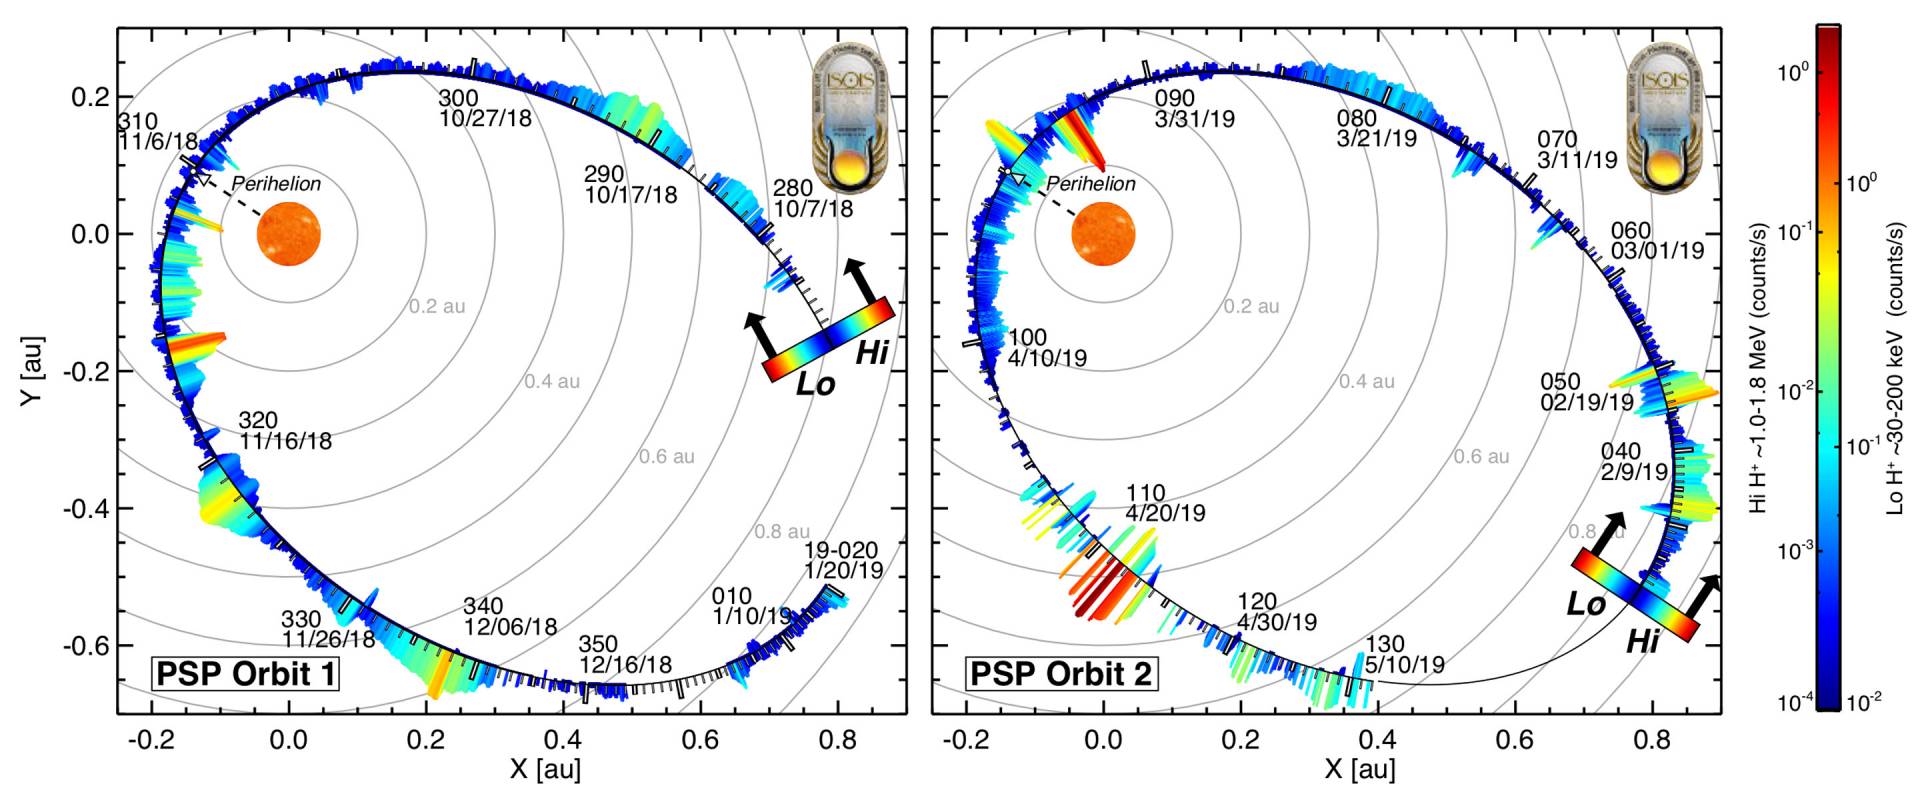 Particles detected during Parker Solar Probe's first two orbits